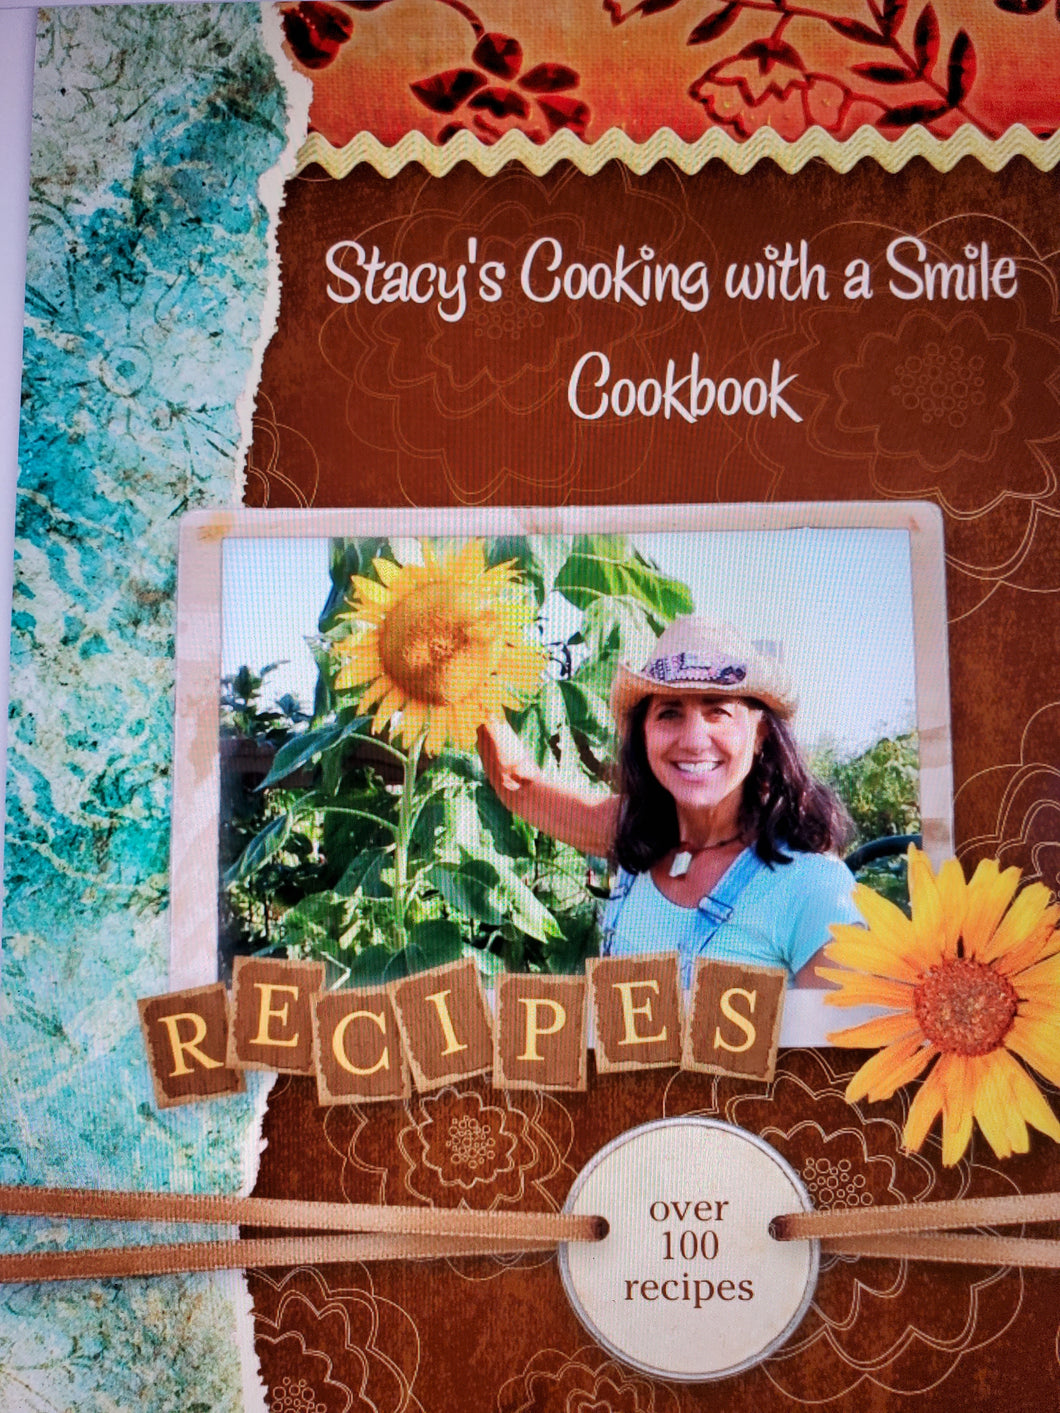 Stacy's Cooking with a Smile Cookbook